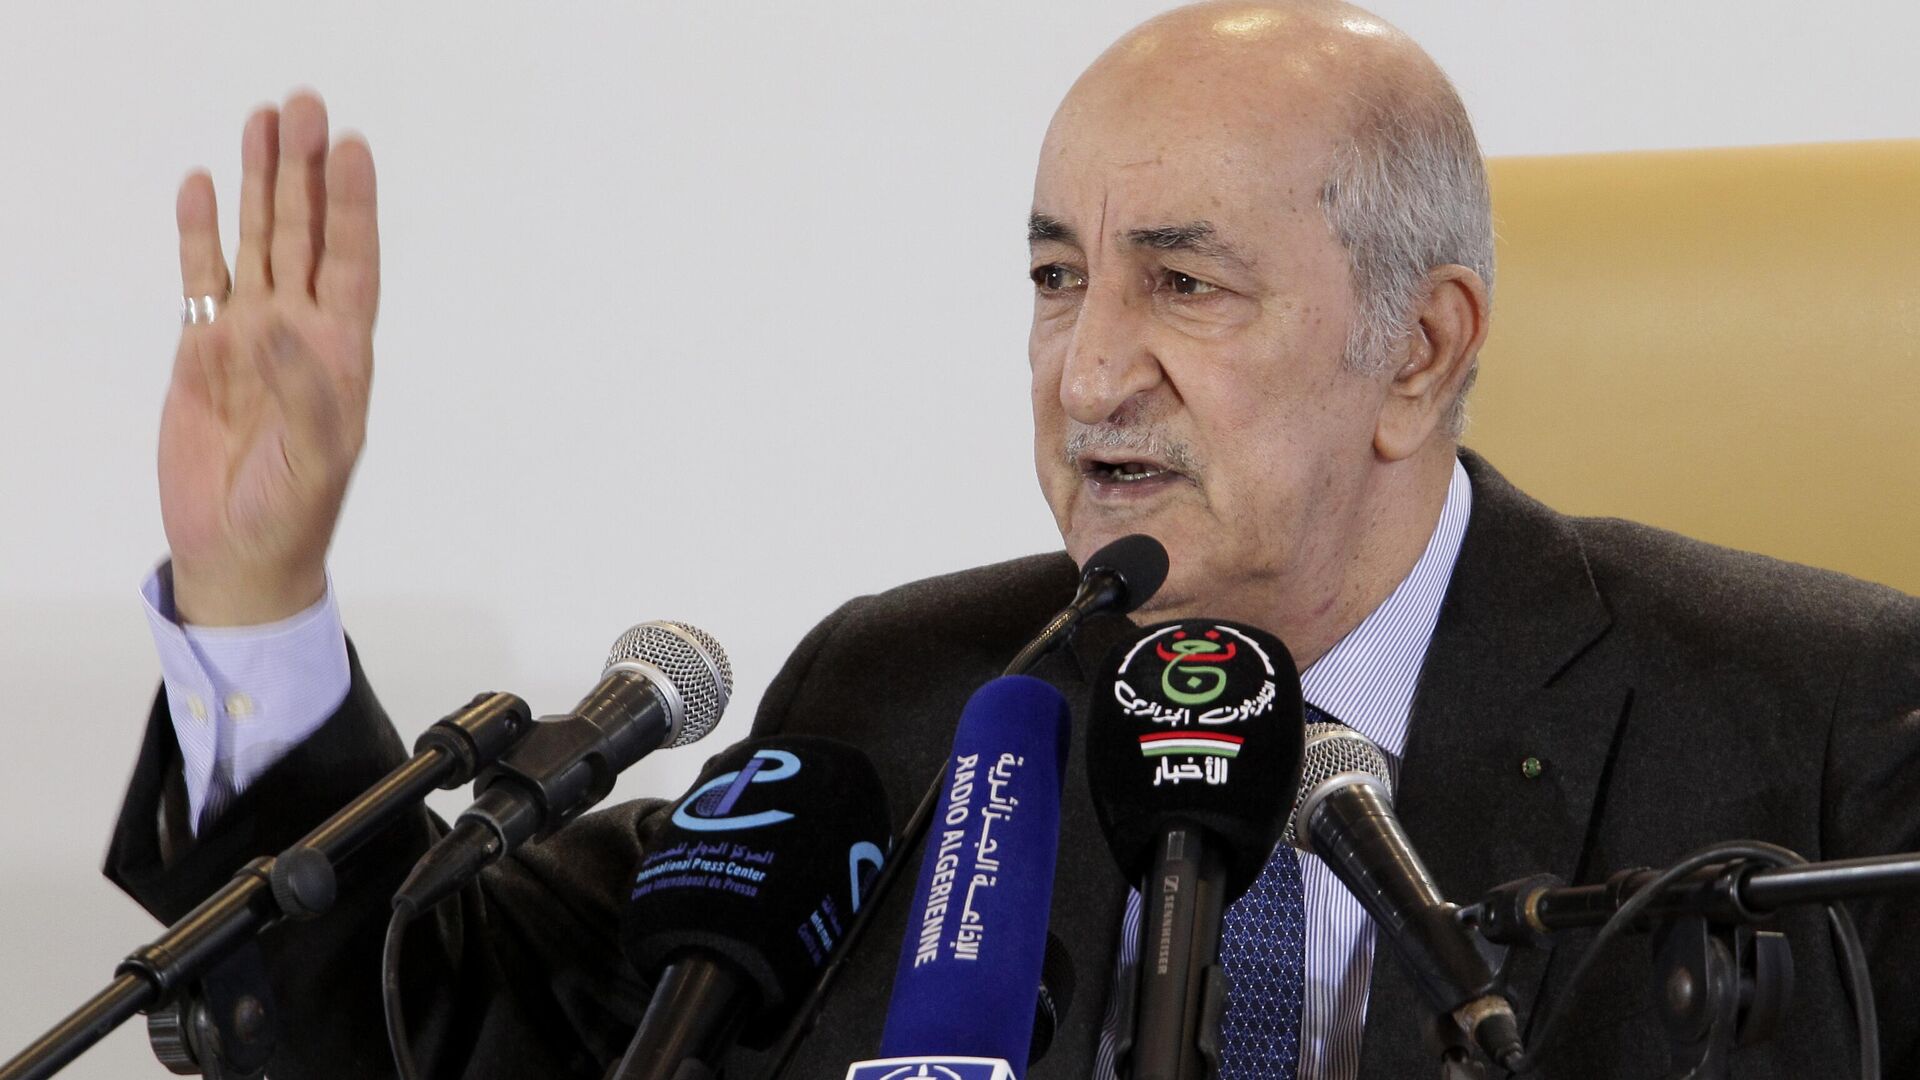 On Dec. 13, 2019 file photo, newly elected Algerian President Abdelmadjid Tebboune gestures during a press conference in Algiers - Sputnik Africa, 1920, 11.11.2023